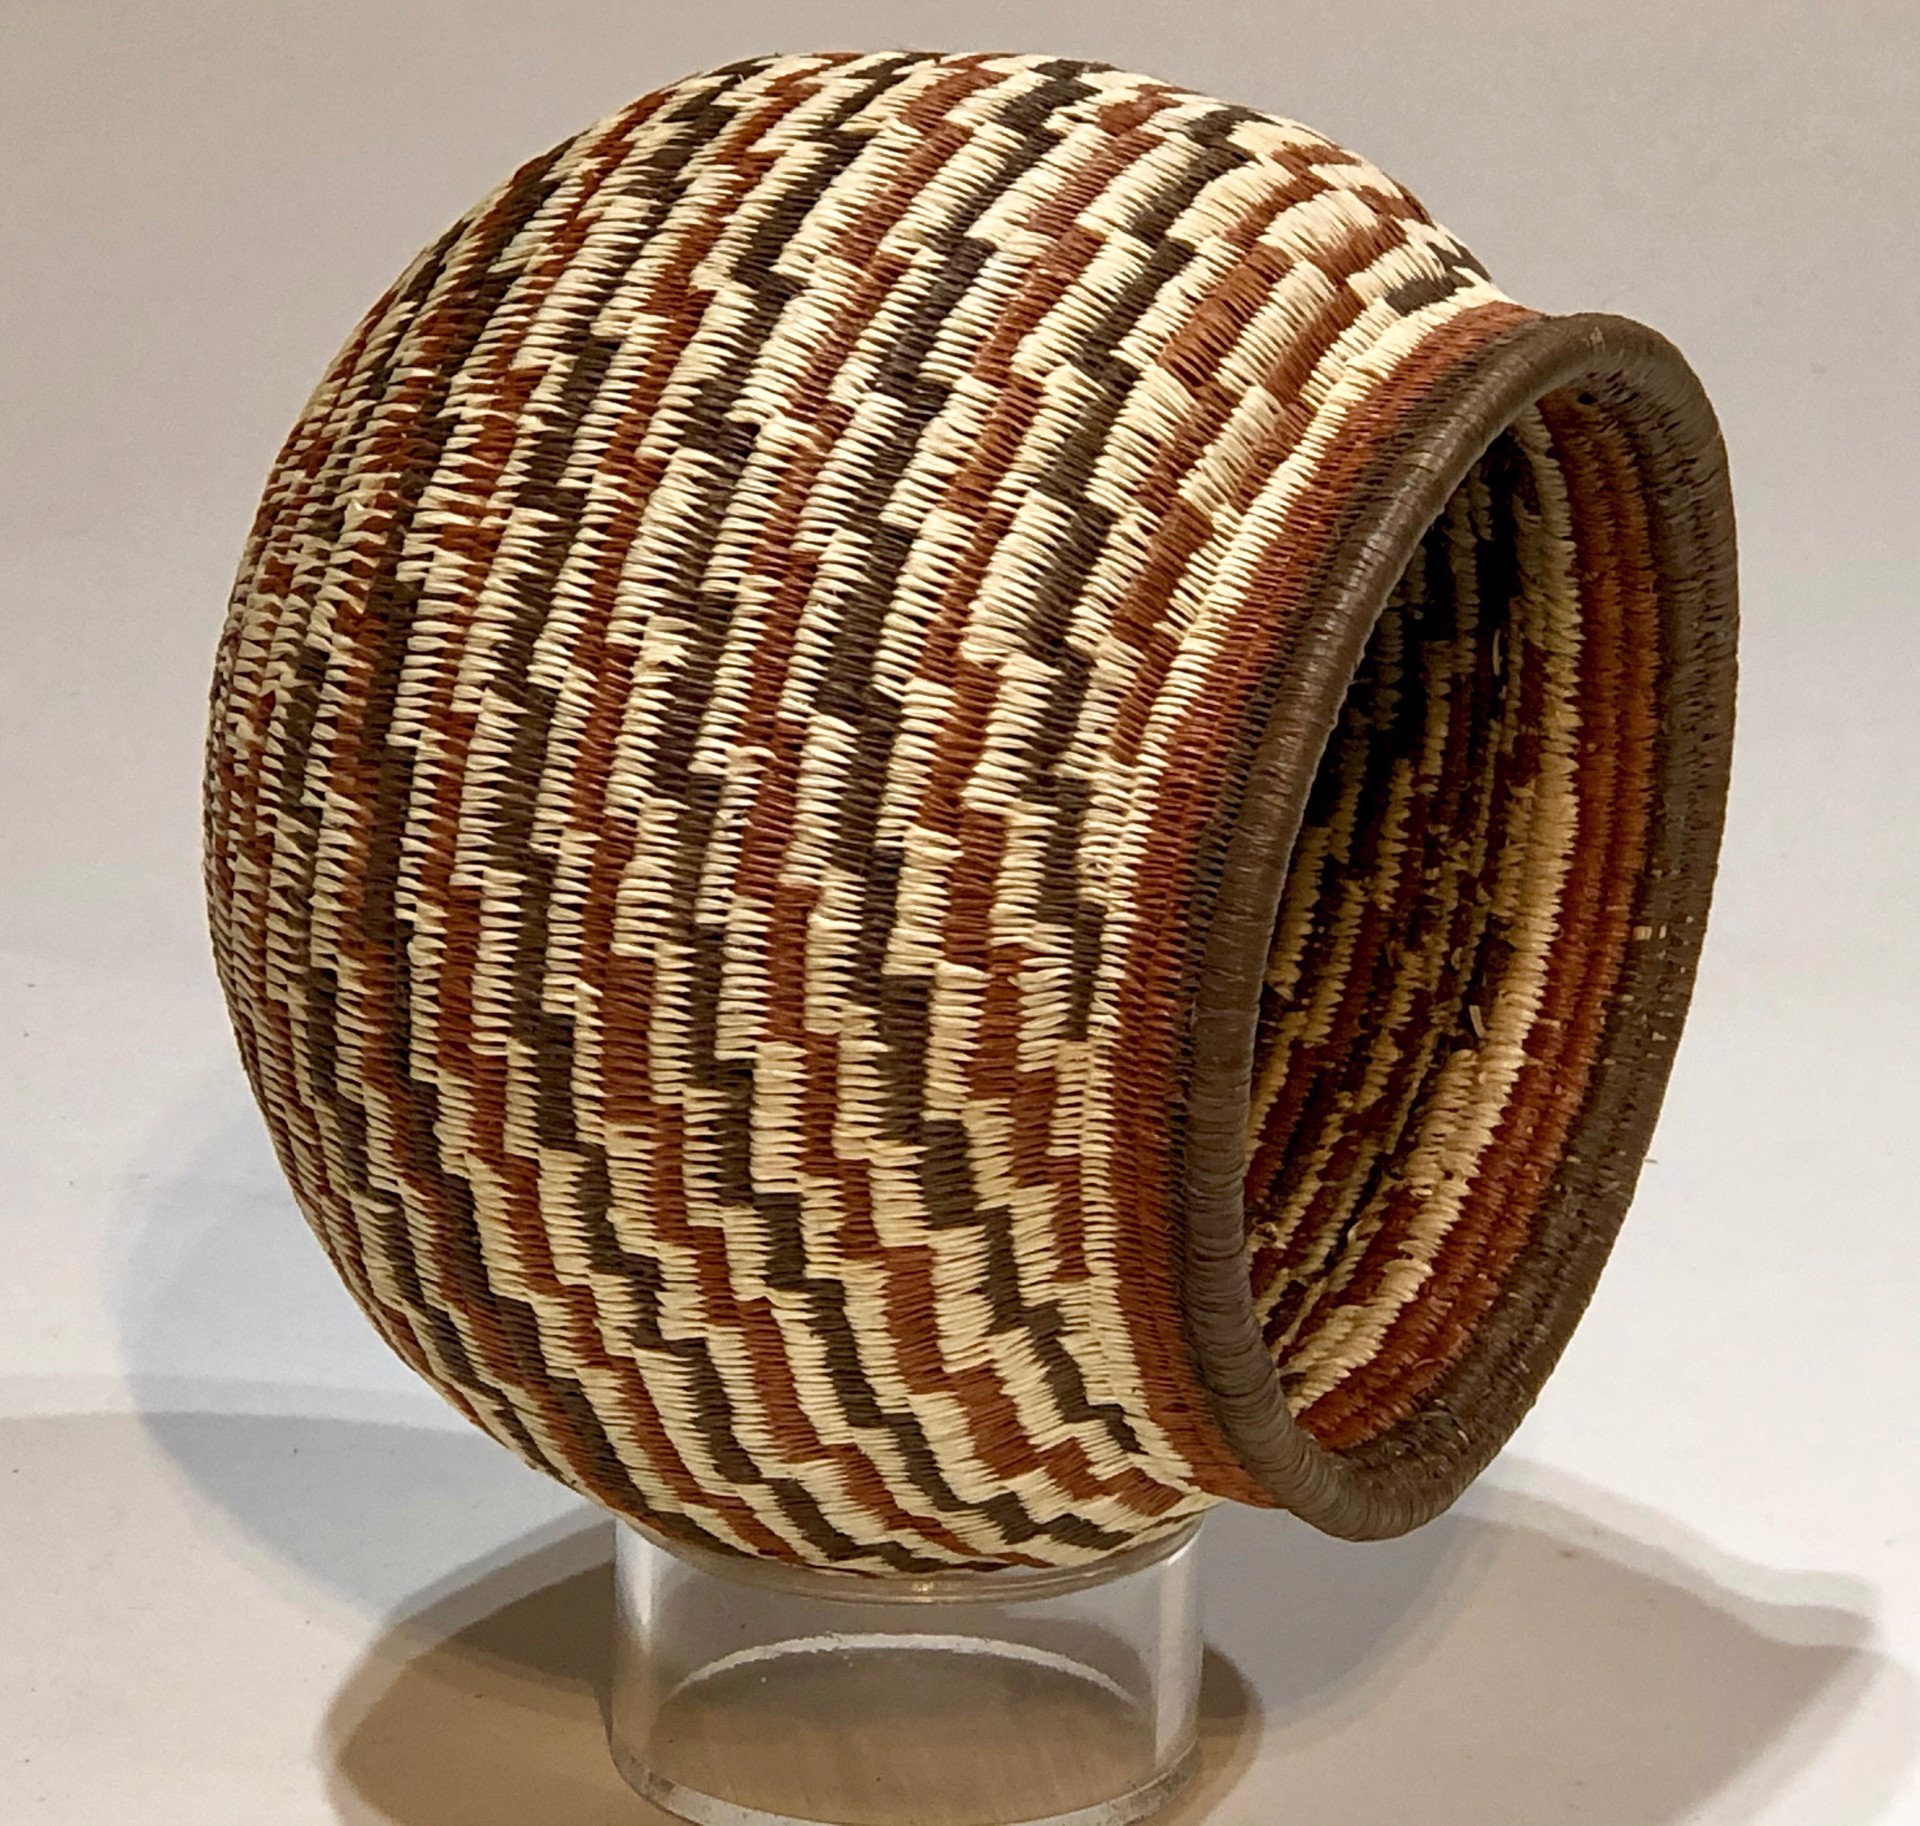 Brown, White and black basket  sw589 (*94) by Carli by Wounaan & Embera Panama Rainforest Baskets Wounaan